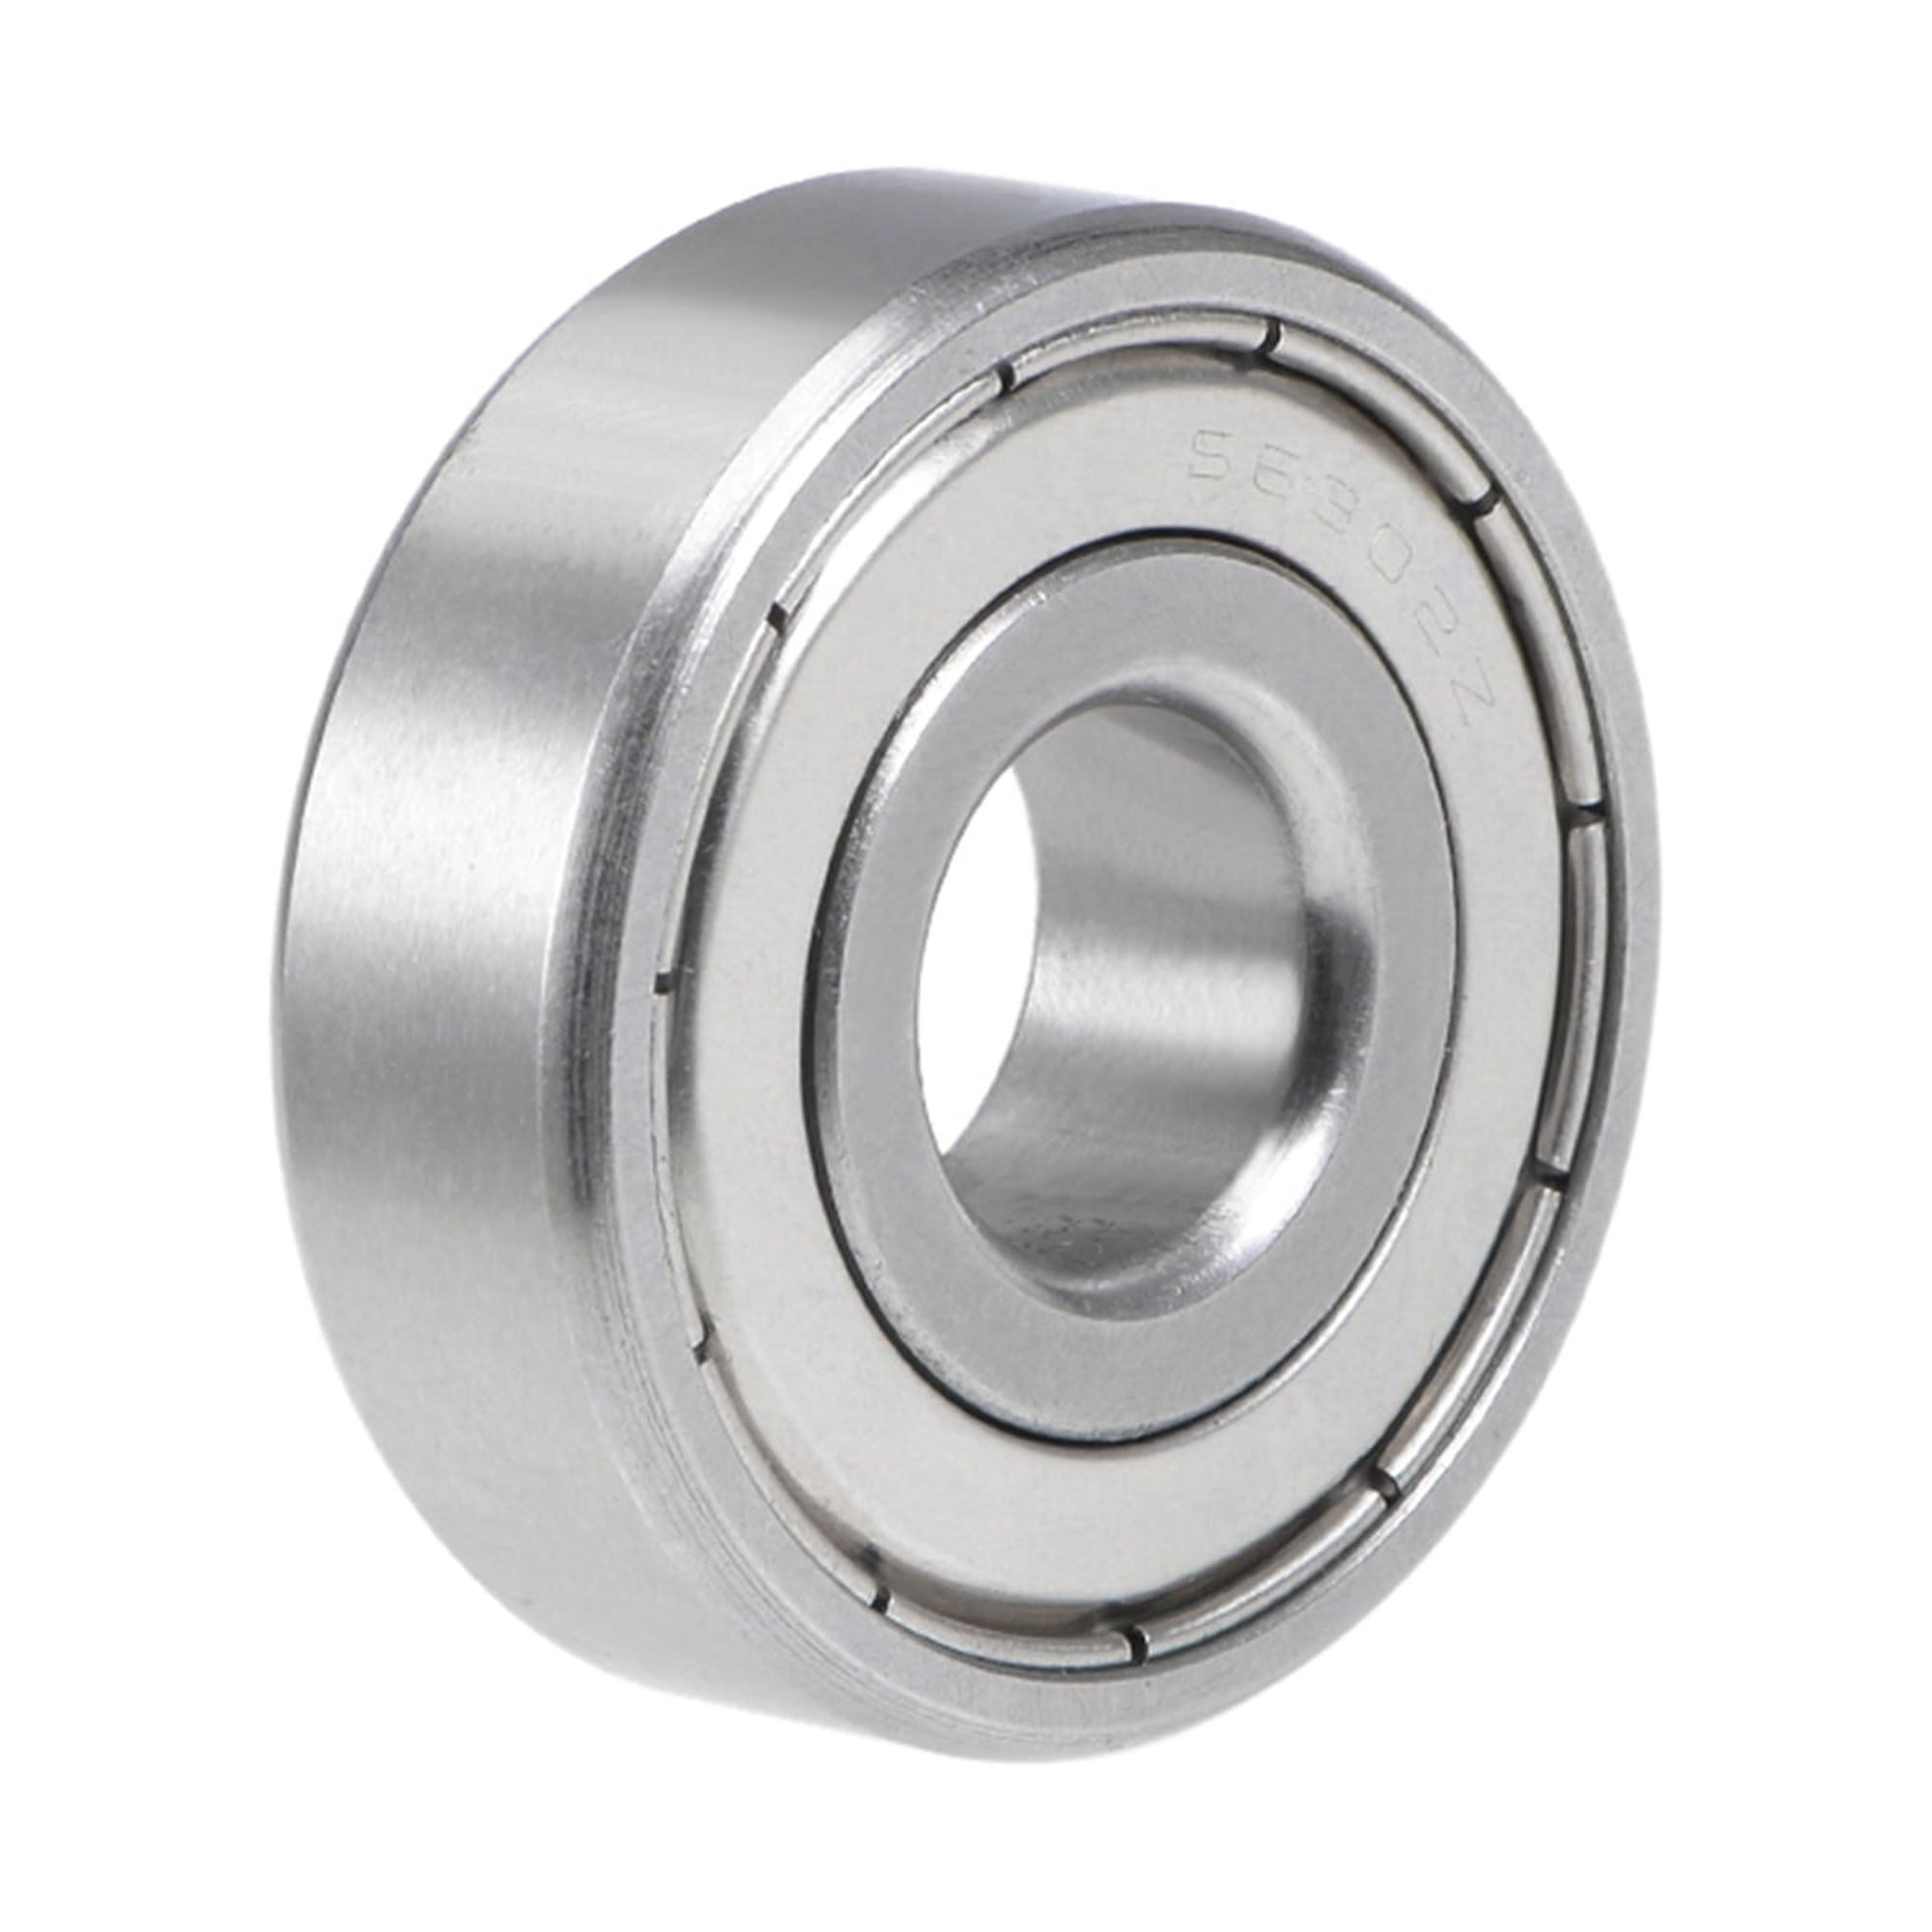 uxcell Silver Tone 608ZZ Shielded Deep Groove Ball Bearings 8mm x